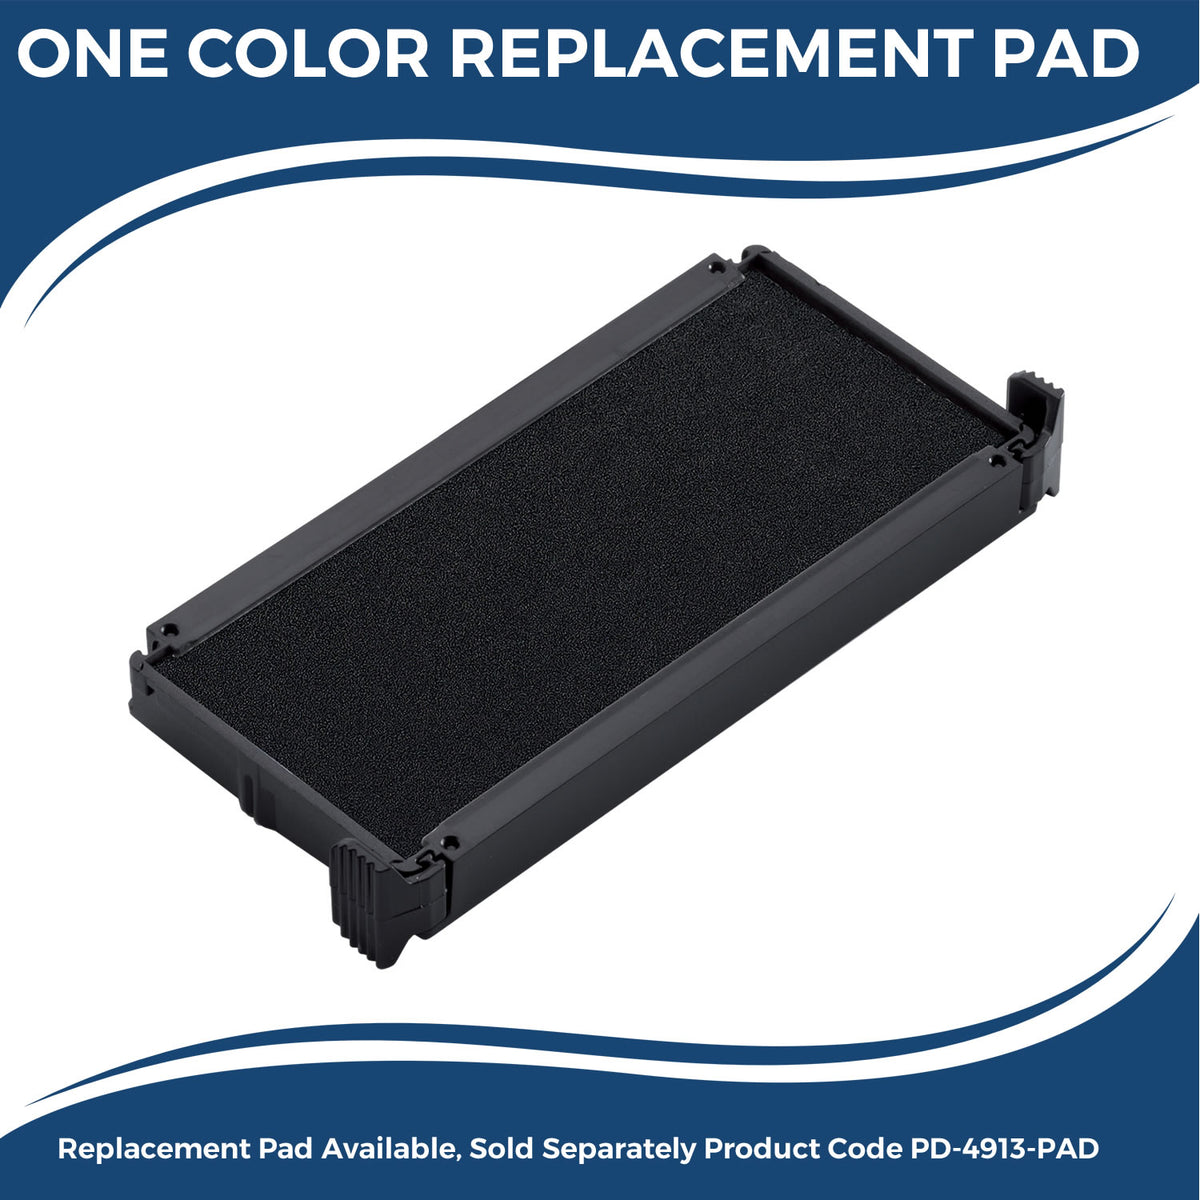 Large Self-Inking Asymptomatic Stamp 4997S Large Replacment Pad